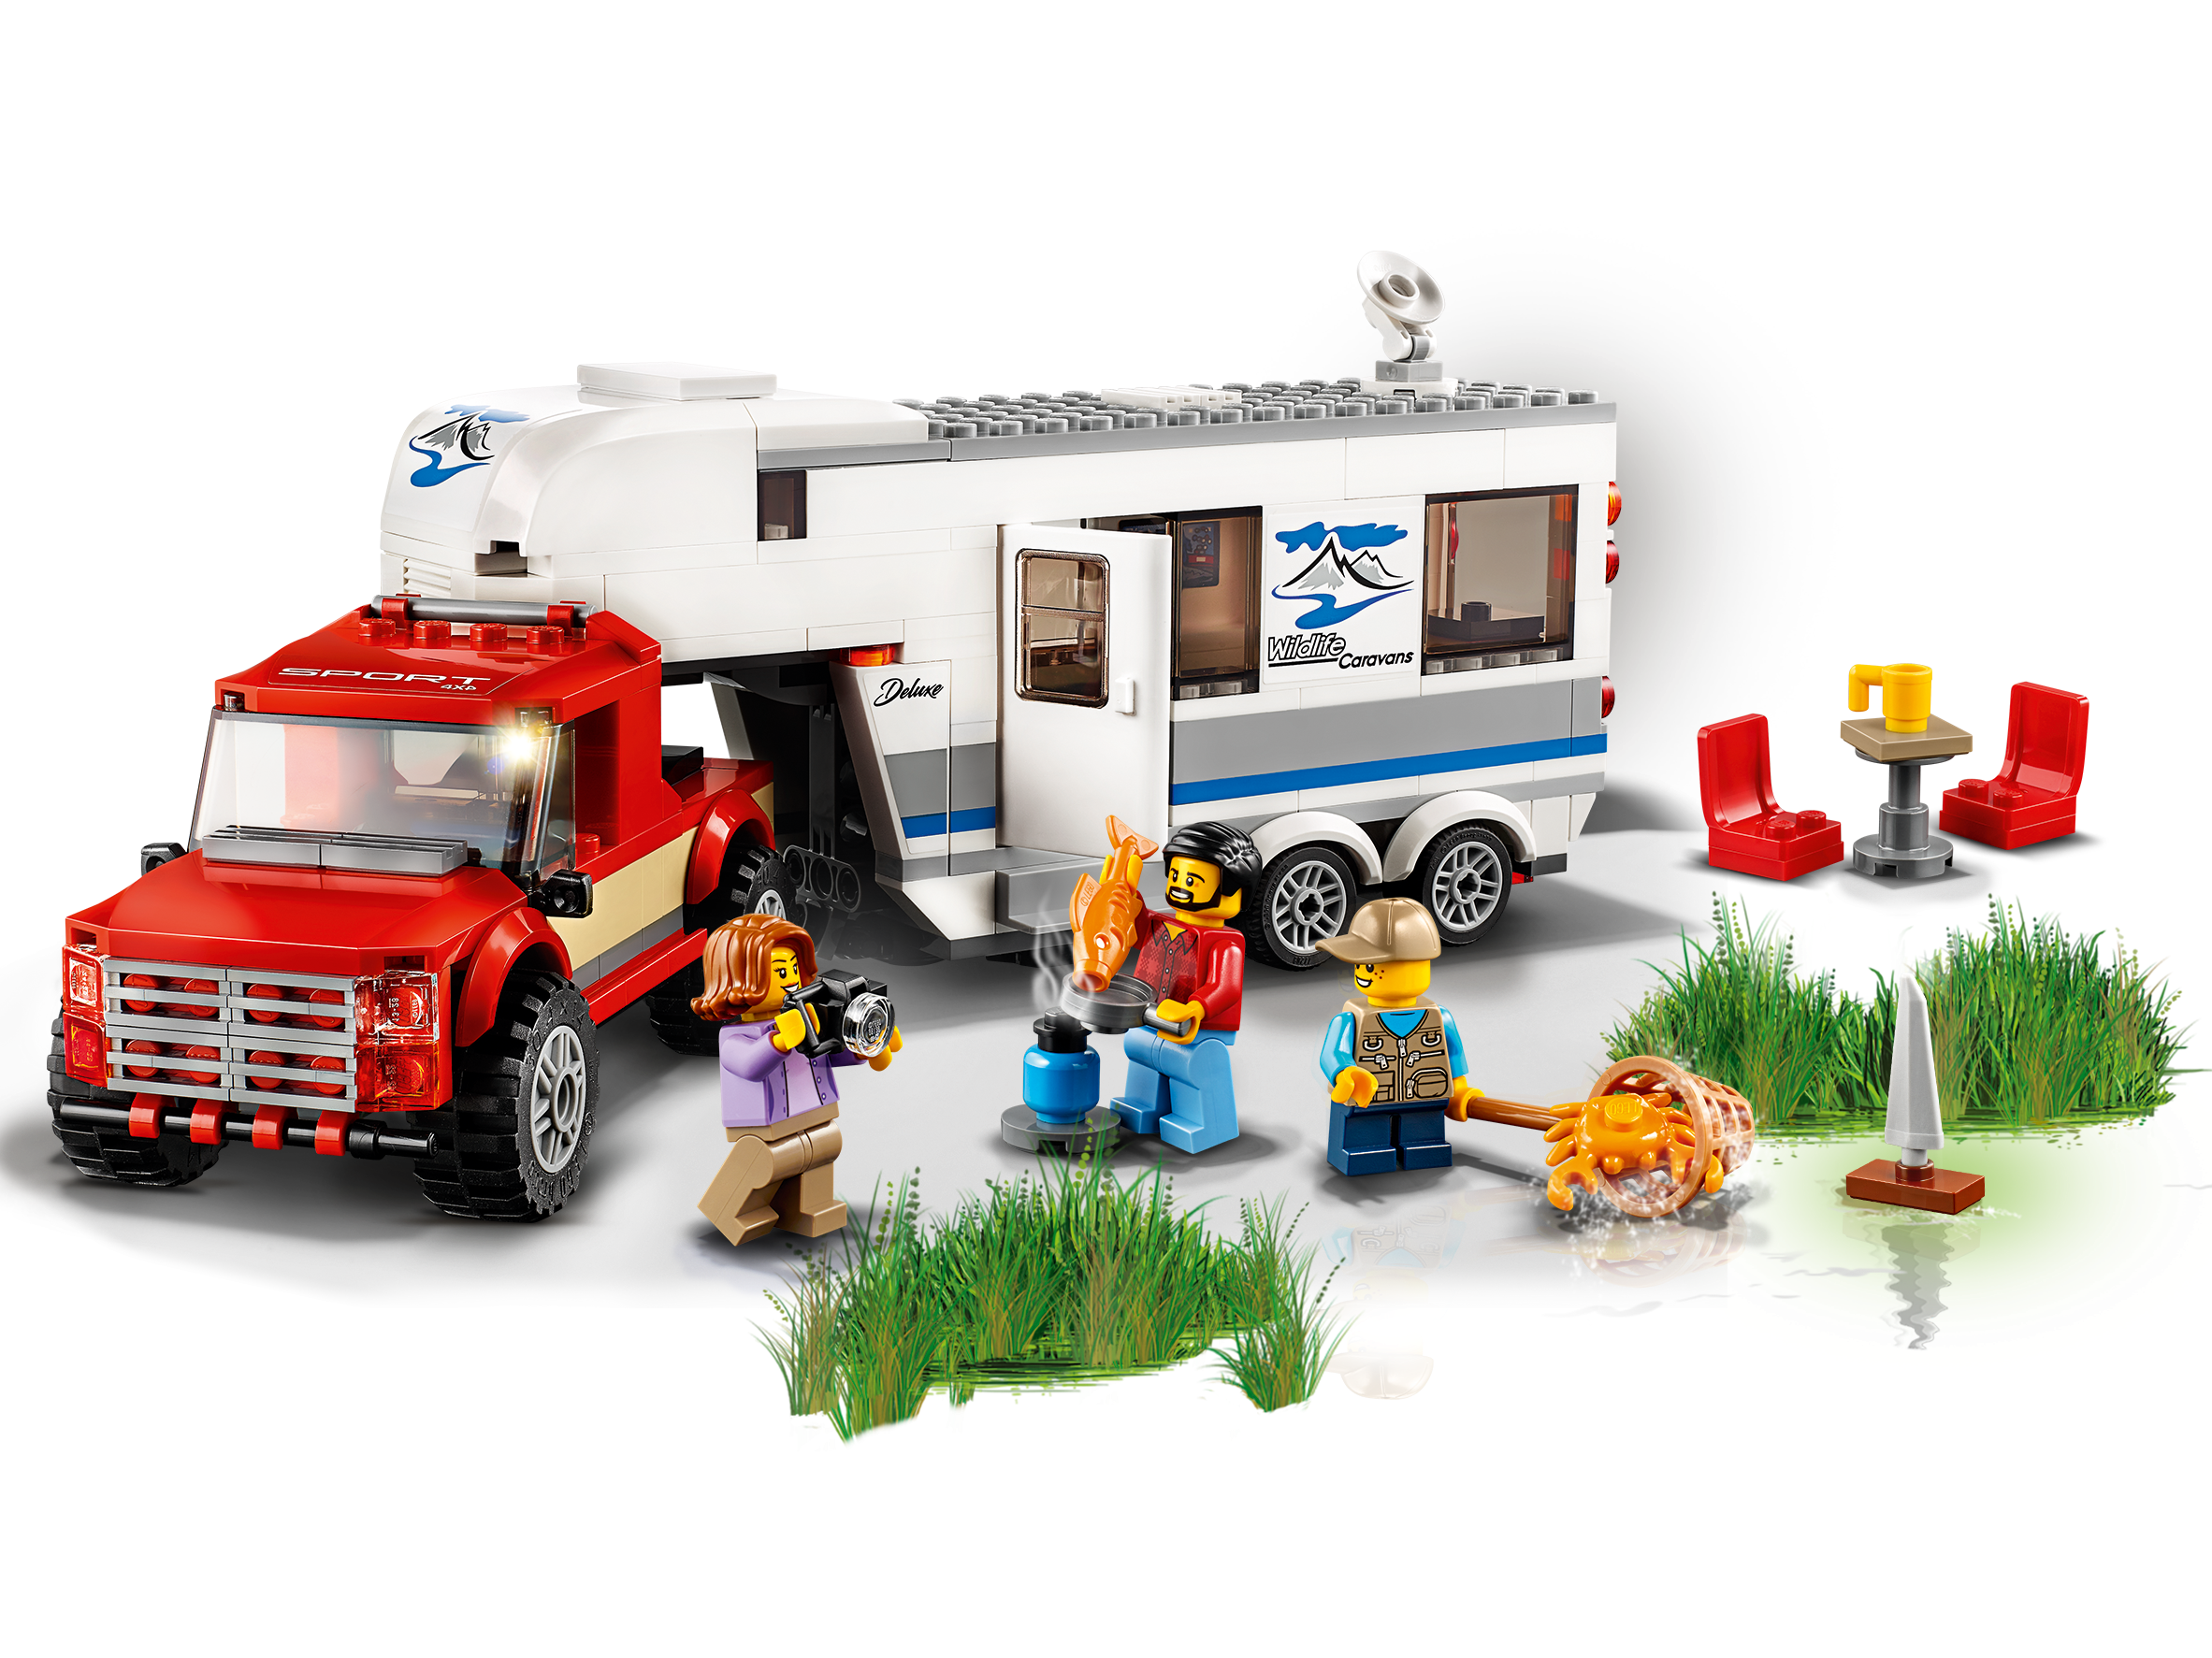 Pickup & Caravan 60182 | City | Buy online at the Official LEGO